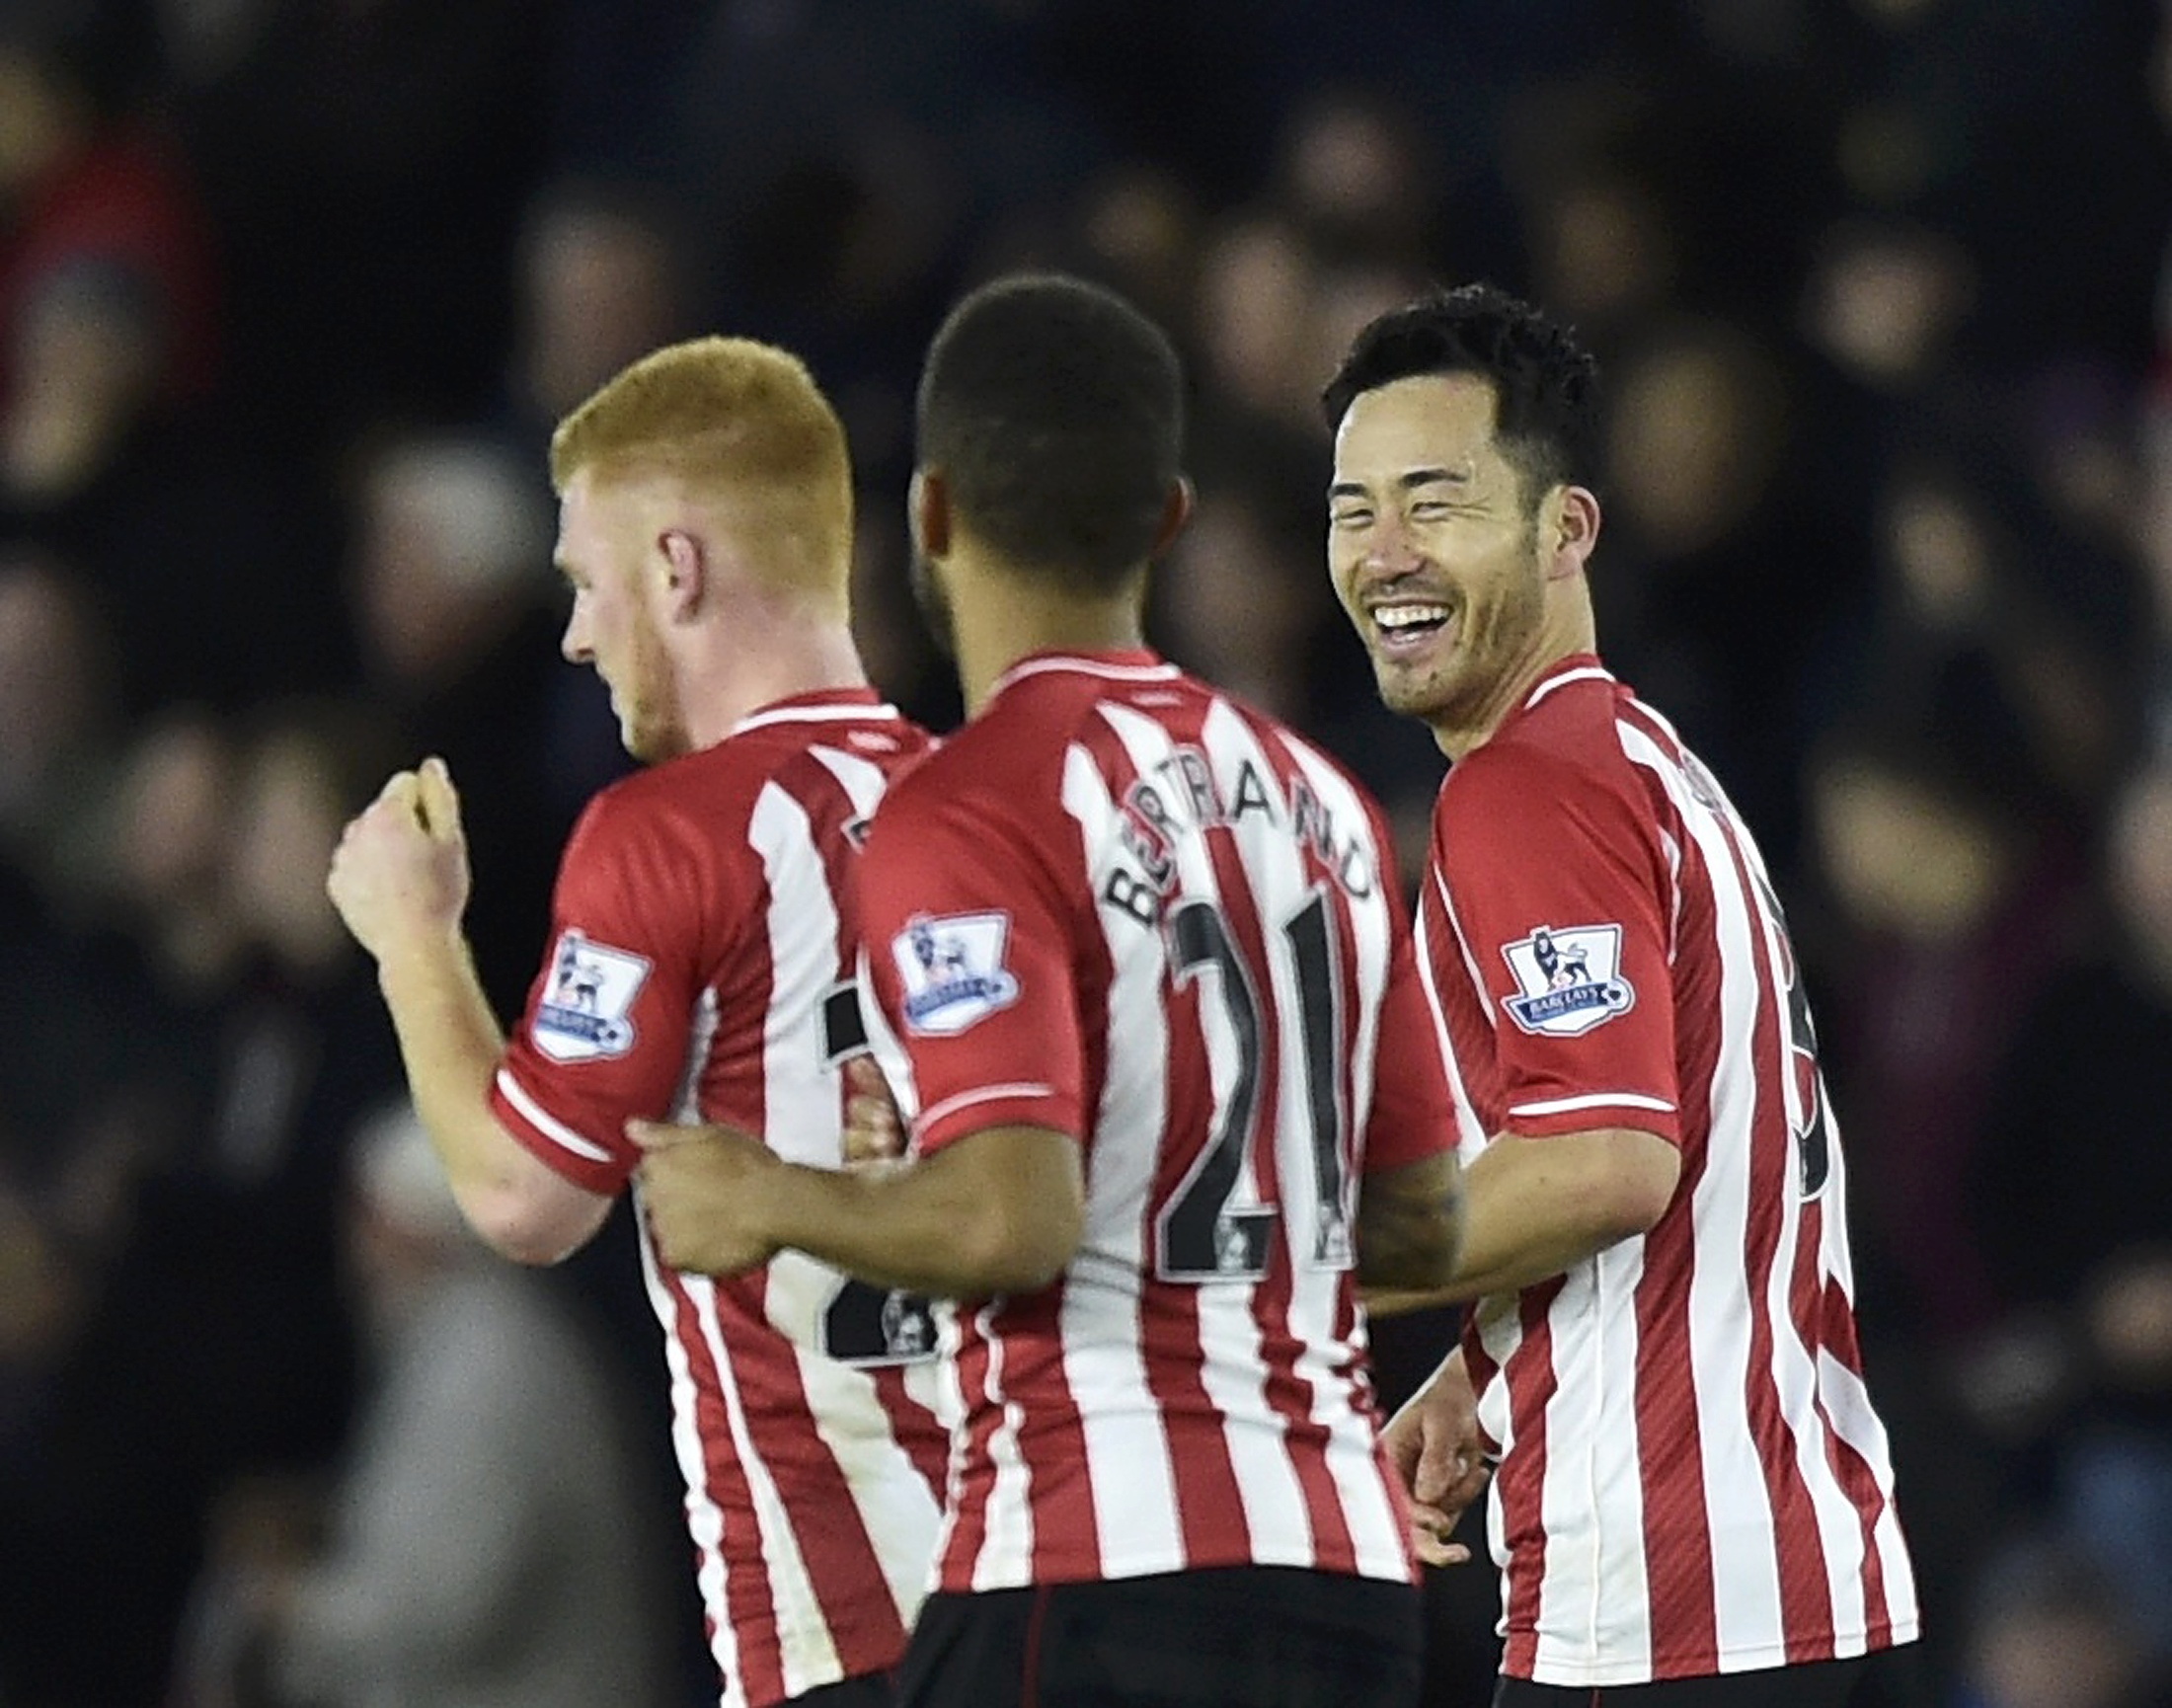 Southampton's Maya Yoshida celebrates with team-mates after scoring a goal against Everton during their English Premier League soccer match at St Mary's Stadium in Southampton